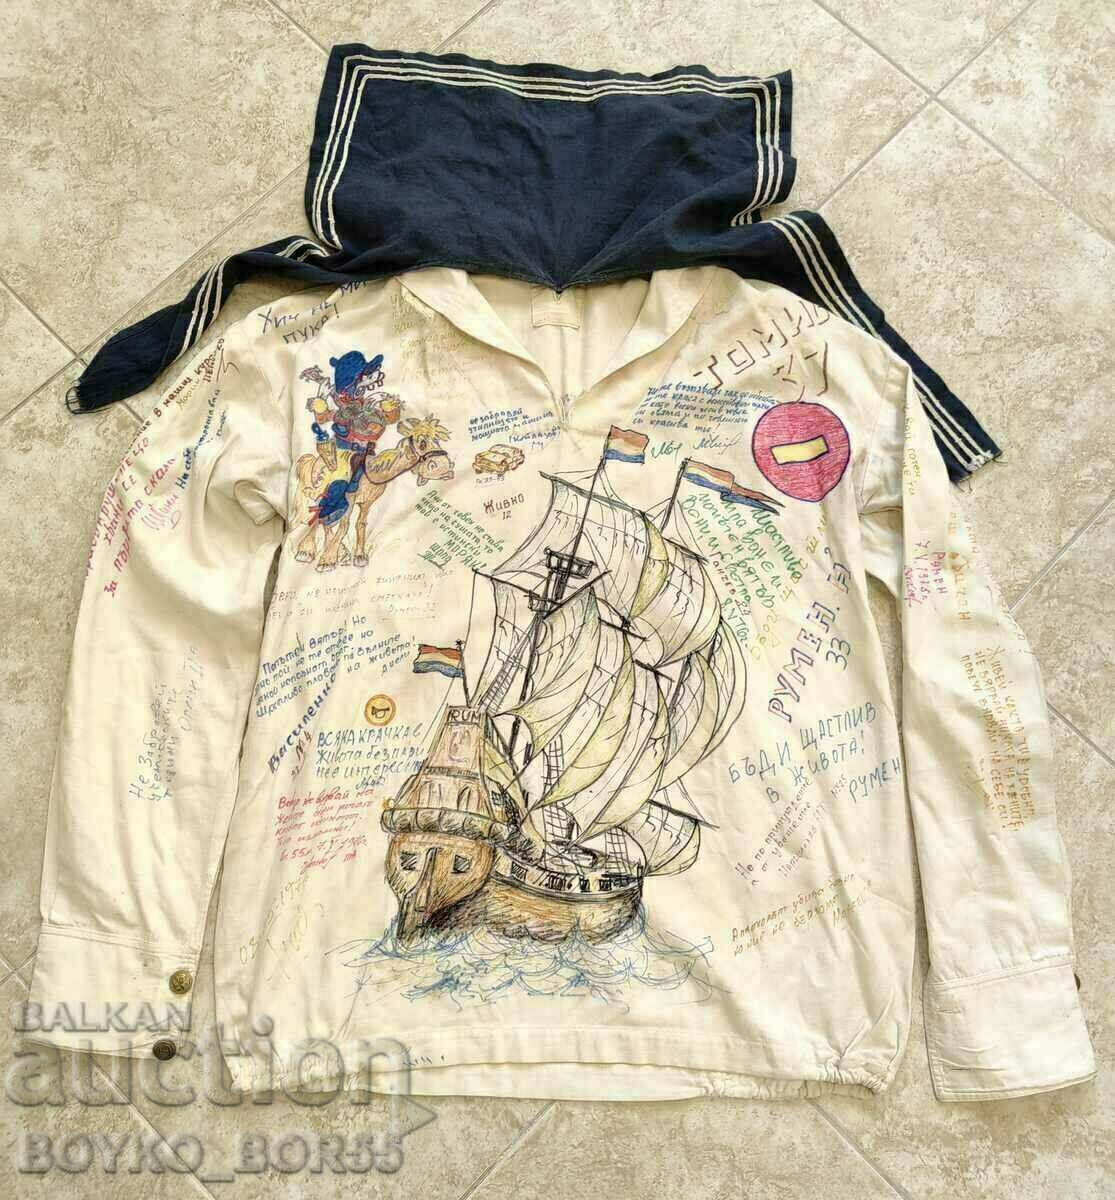 Artifact! Unique Sailor Shirt of a High School Graduate from Ruse 1976